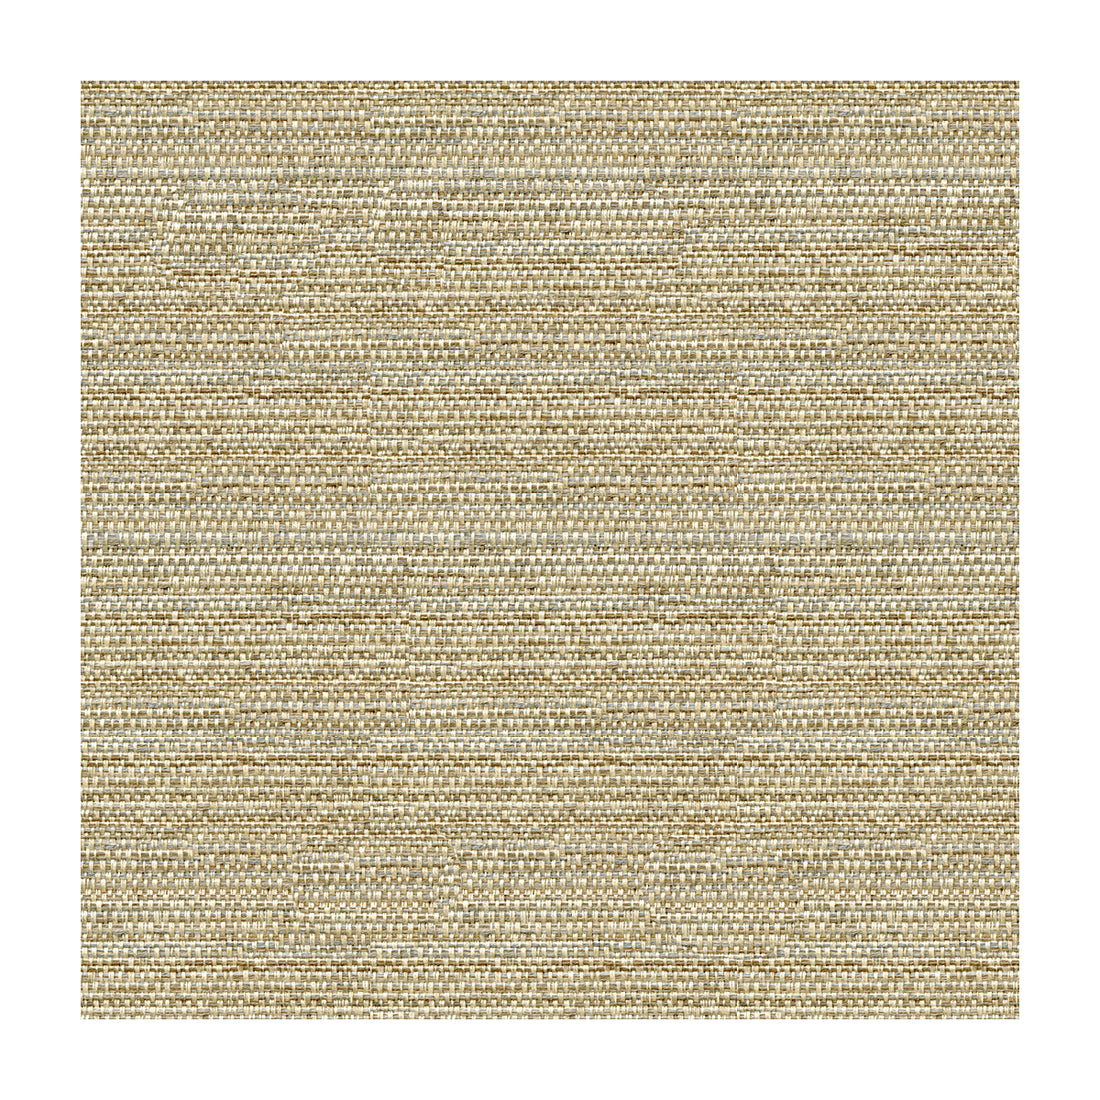 Kravet Couture fabric in 31695-1611 color - pattern 31695.1611.0 - by Kravet Couture